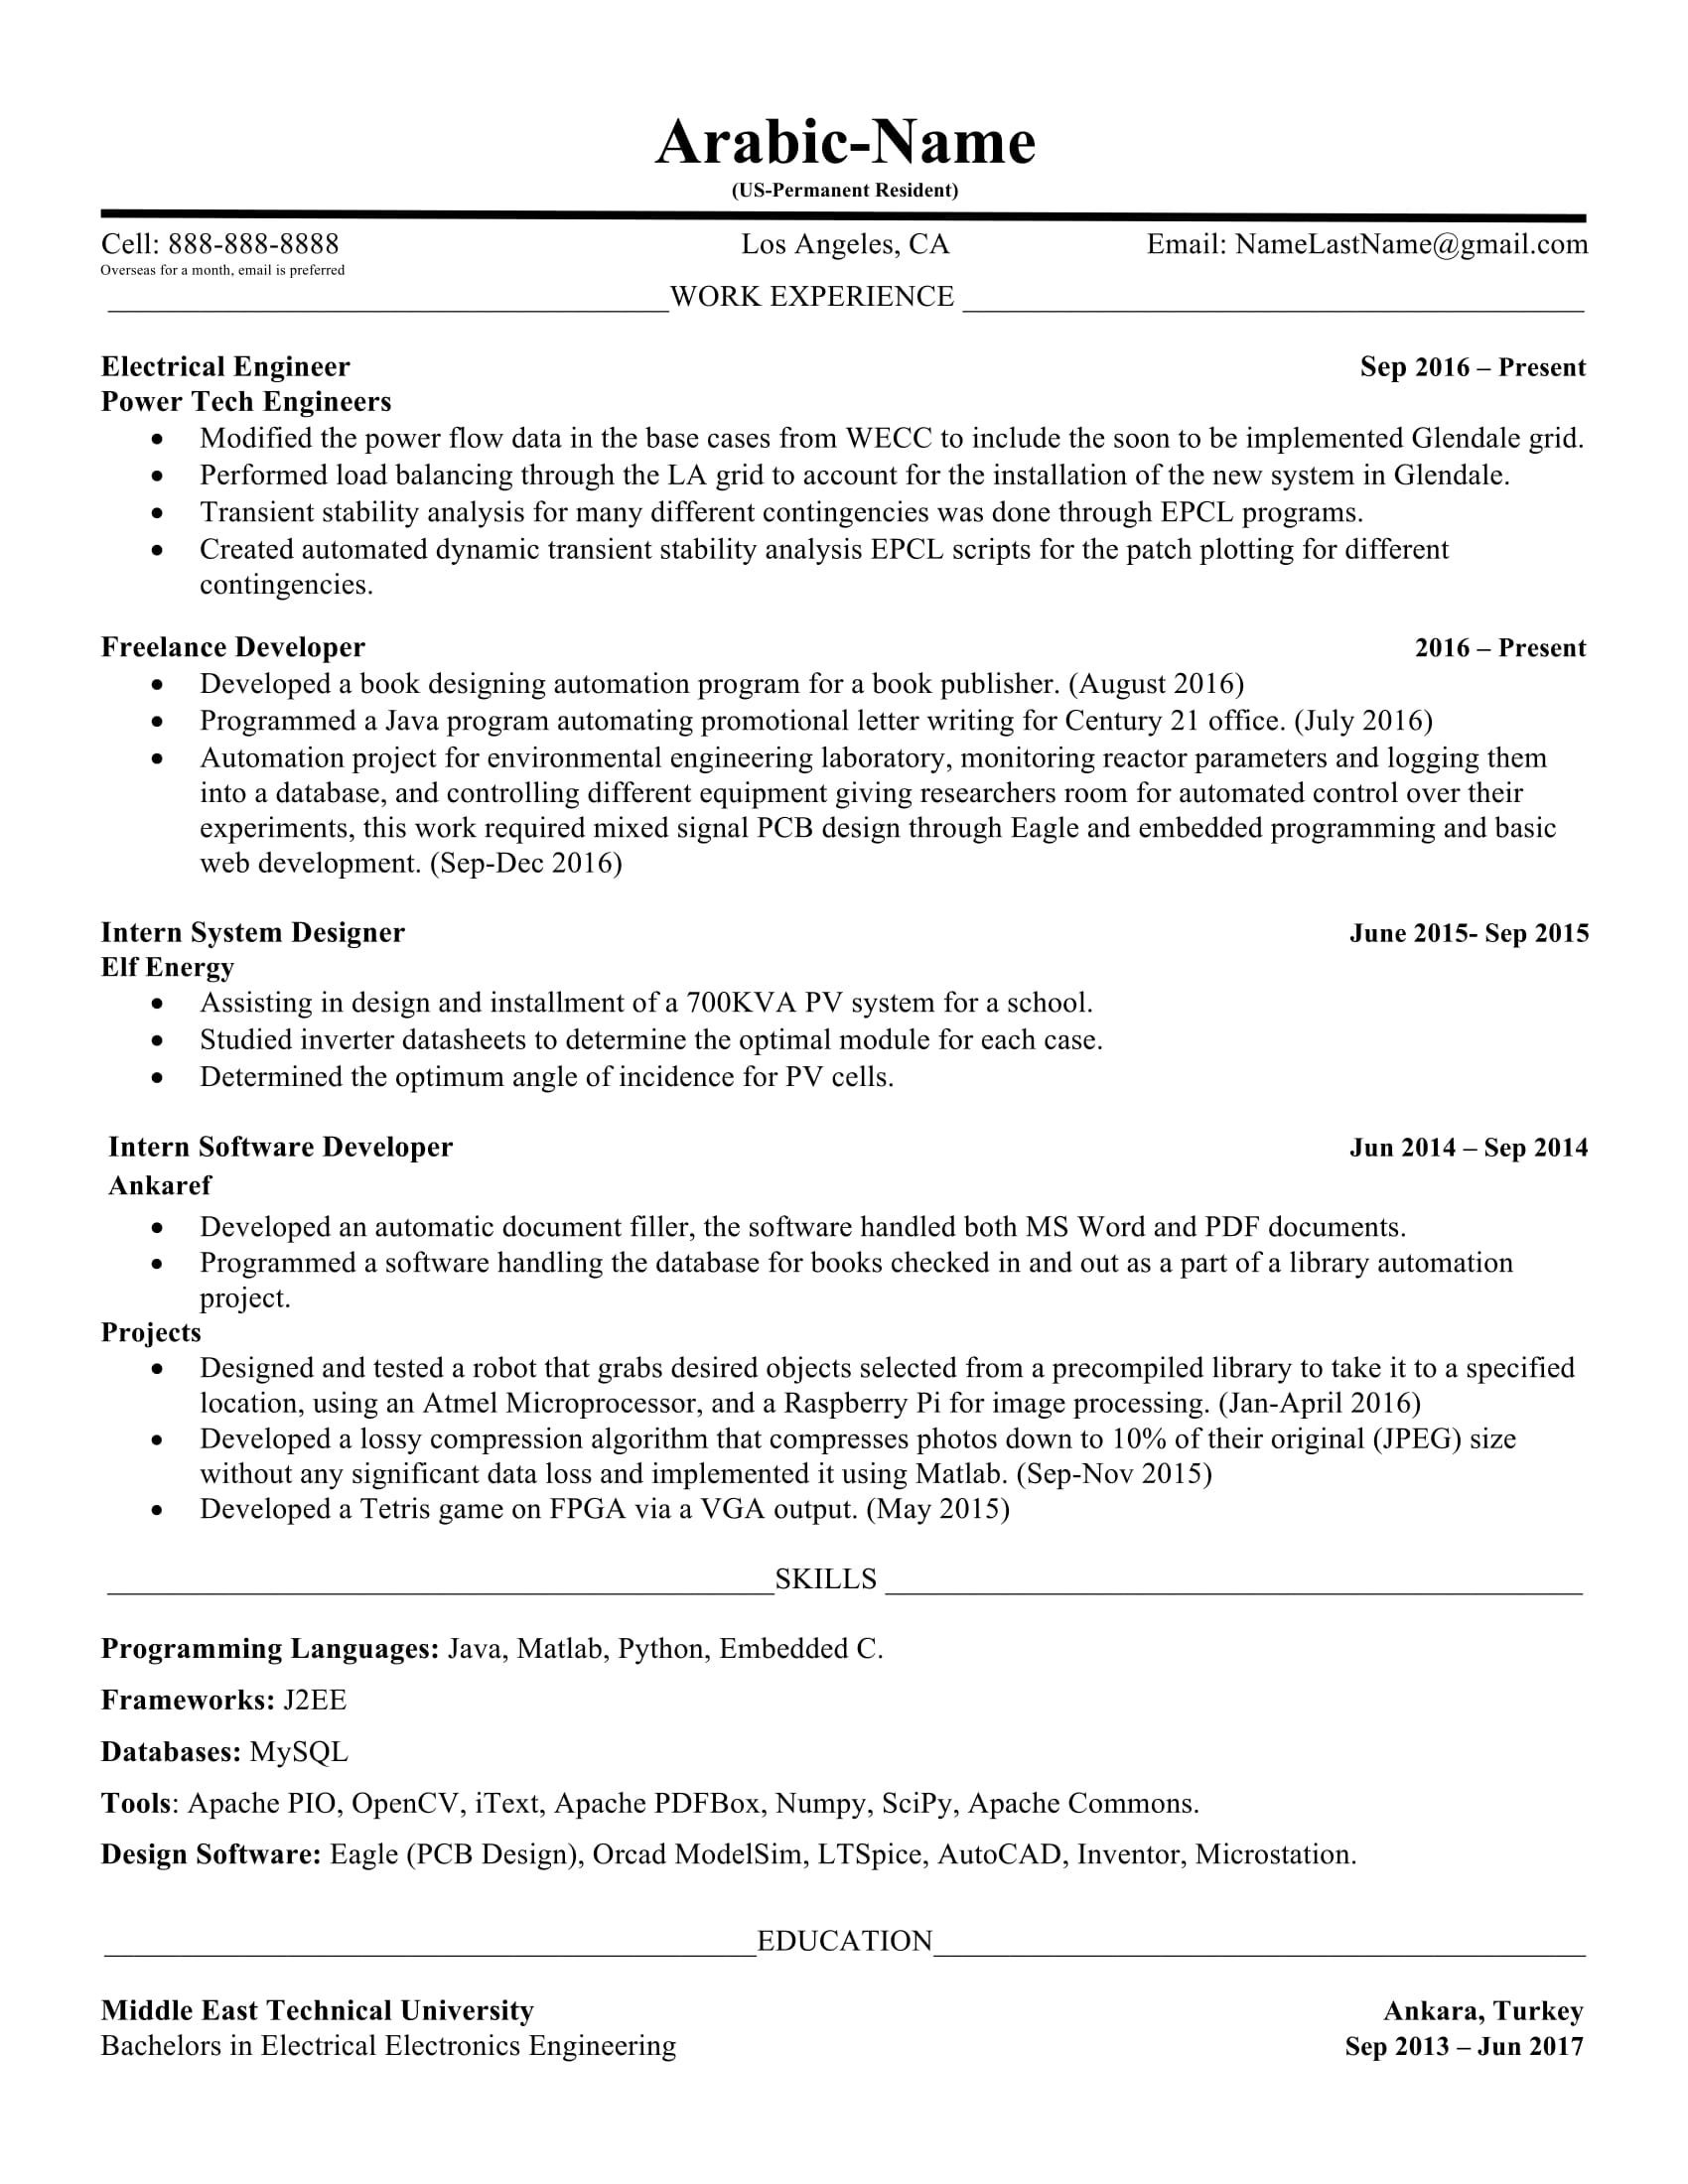 Resume Sample for Entry Level Electrical Engineer Entry Level Electrical Engineer Resume : R/resumes